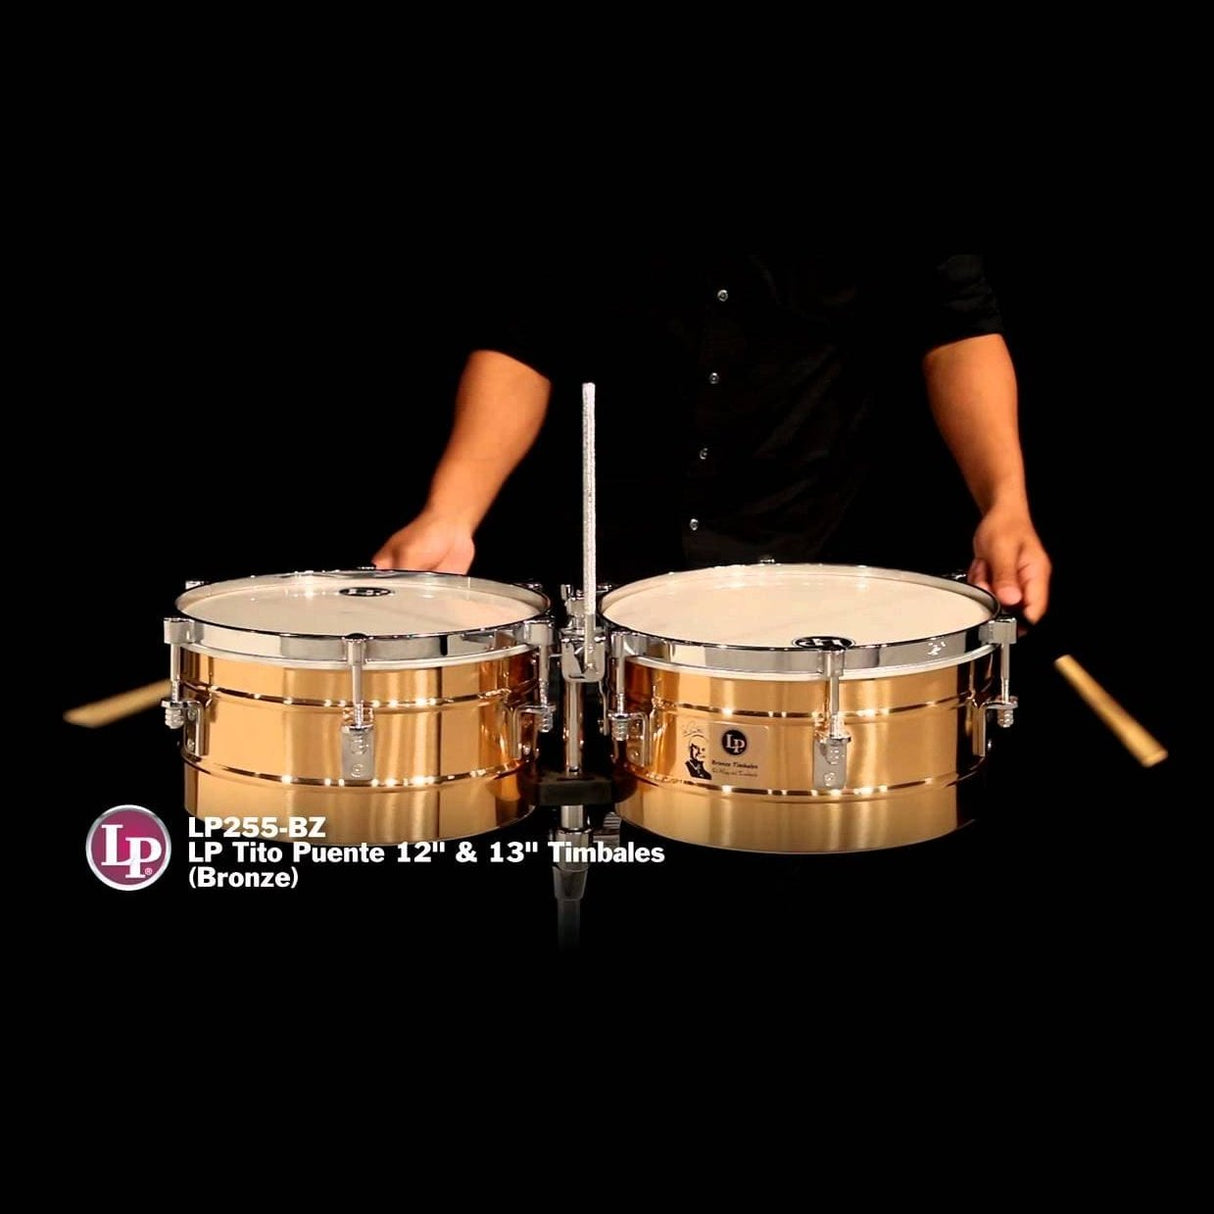 LP Tito Puente 12 & 13 Timbales - Bronze